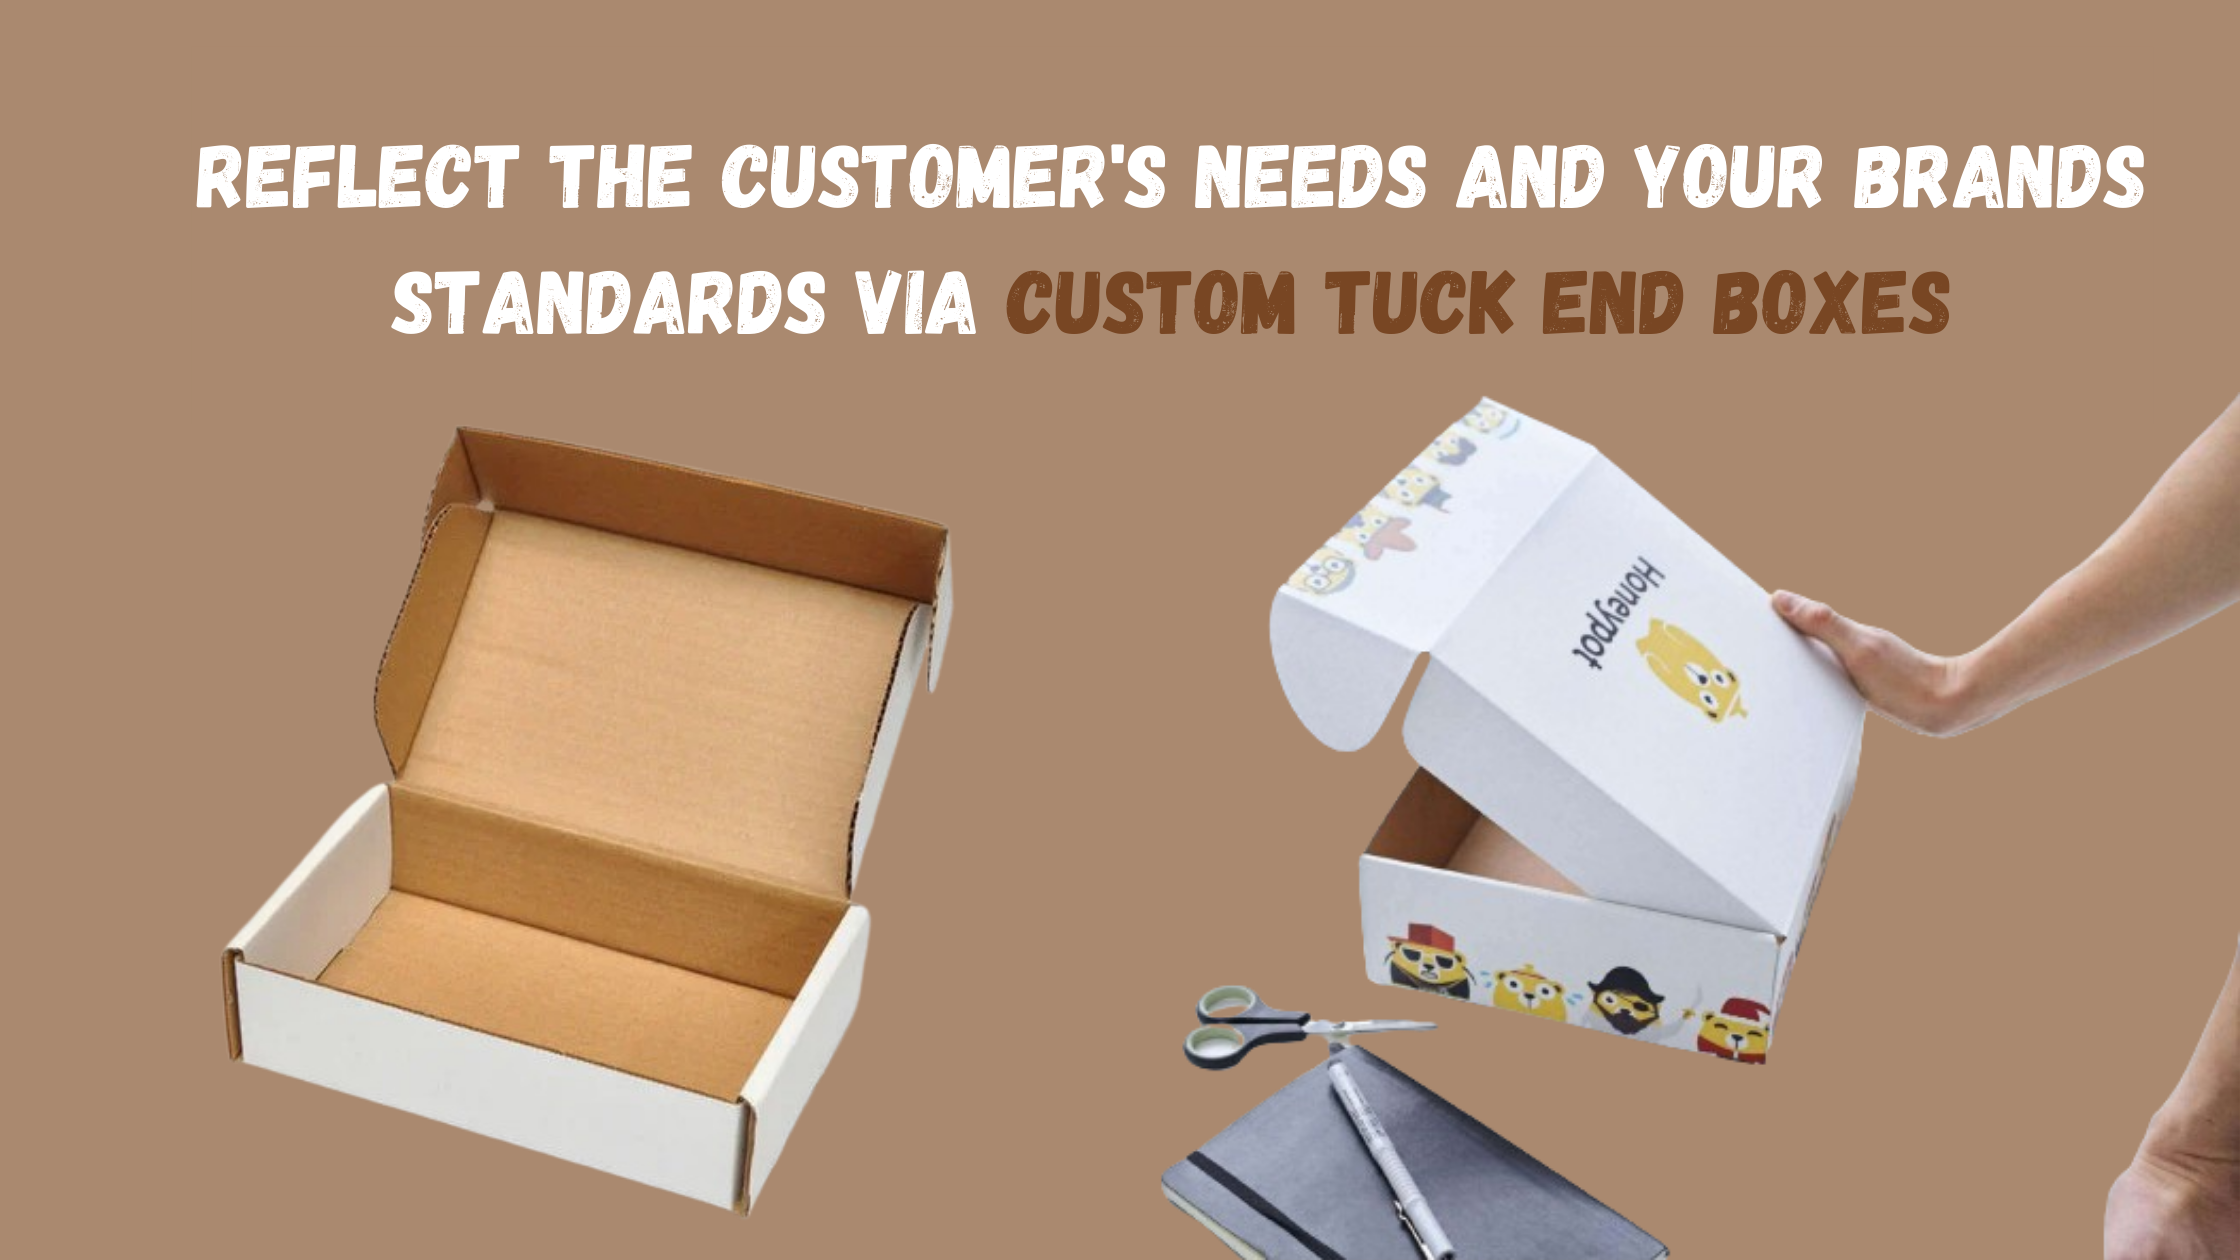 Reflect The Customer's Needs And Your Brands Standards Via Custom Tuck End Boxes